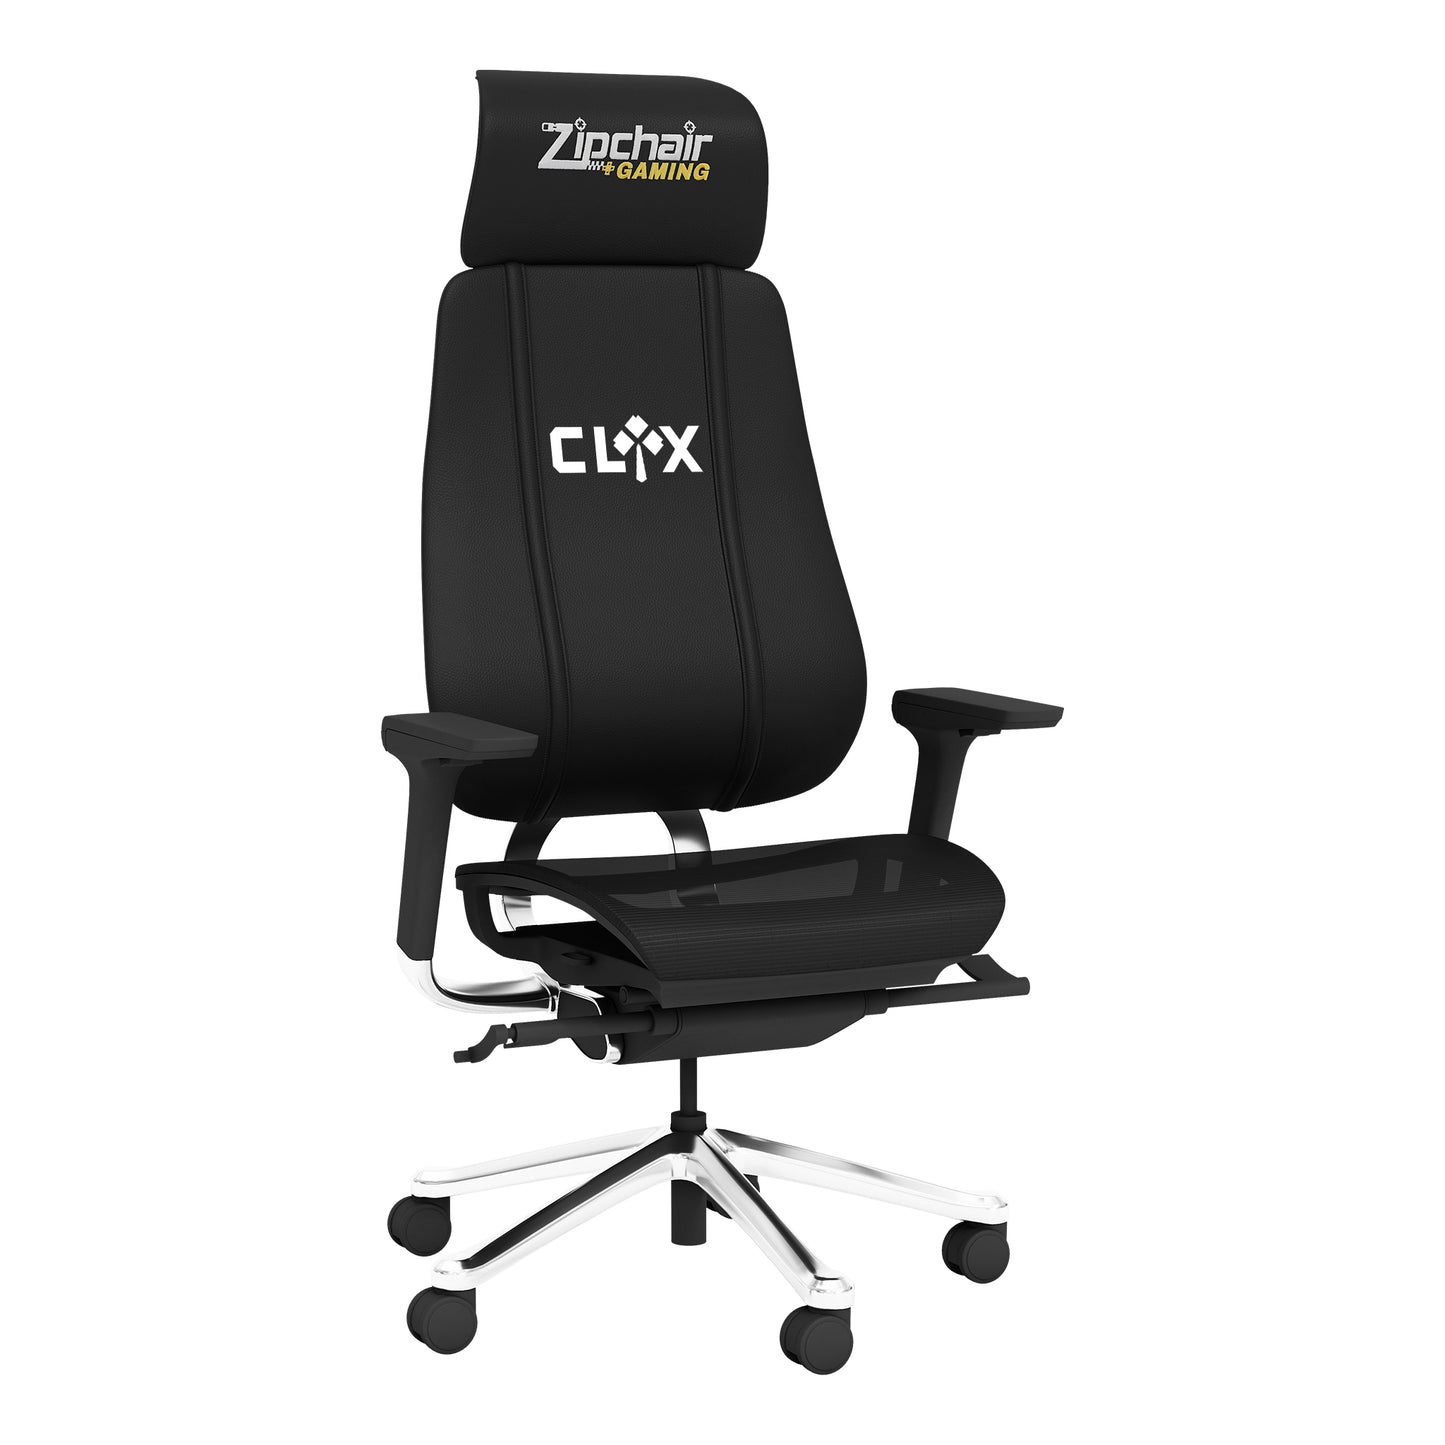 PhantomX Mesh Gaming Chair with Celtics Crossover Gaming Wordmark White [CAN ONLY BE SHIPPED TO MASSACHUSETTS]